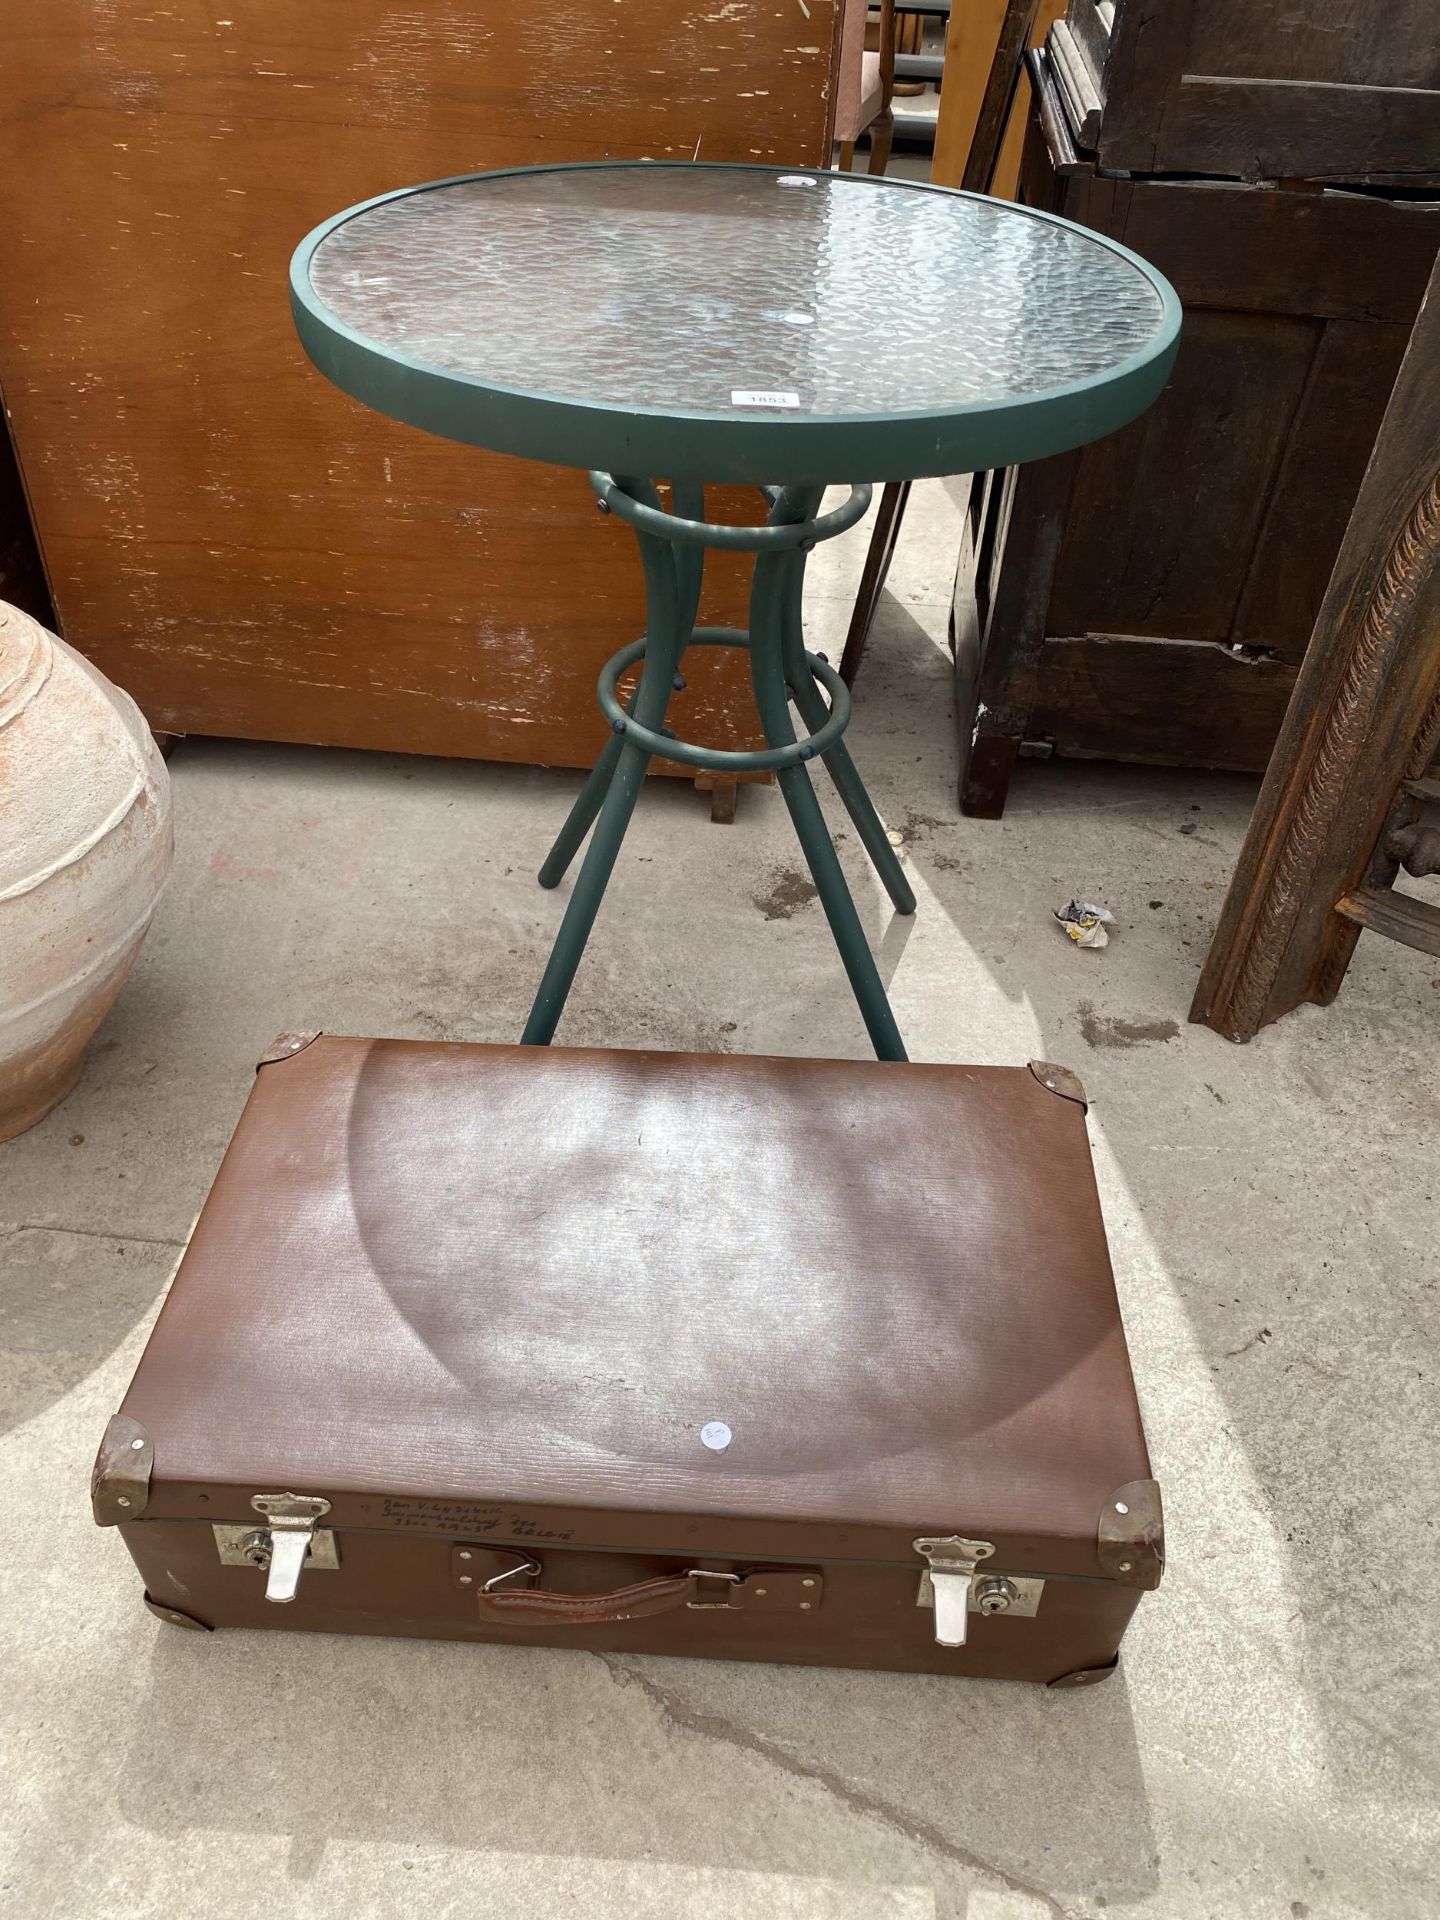 A GLASS TOPPED BISTRO TABLE AND A TRAVEL CASE